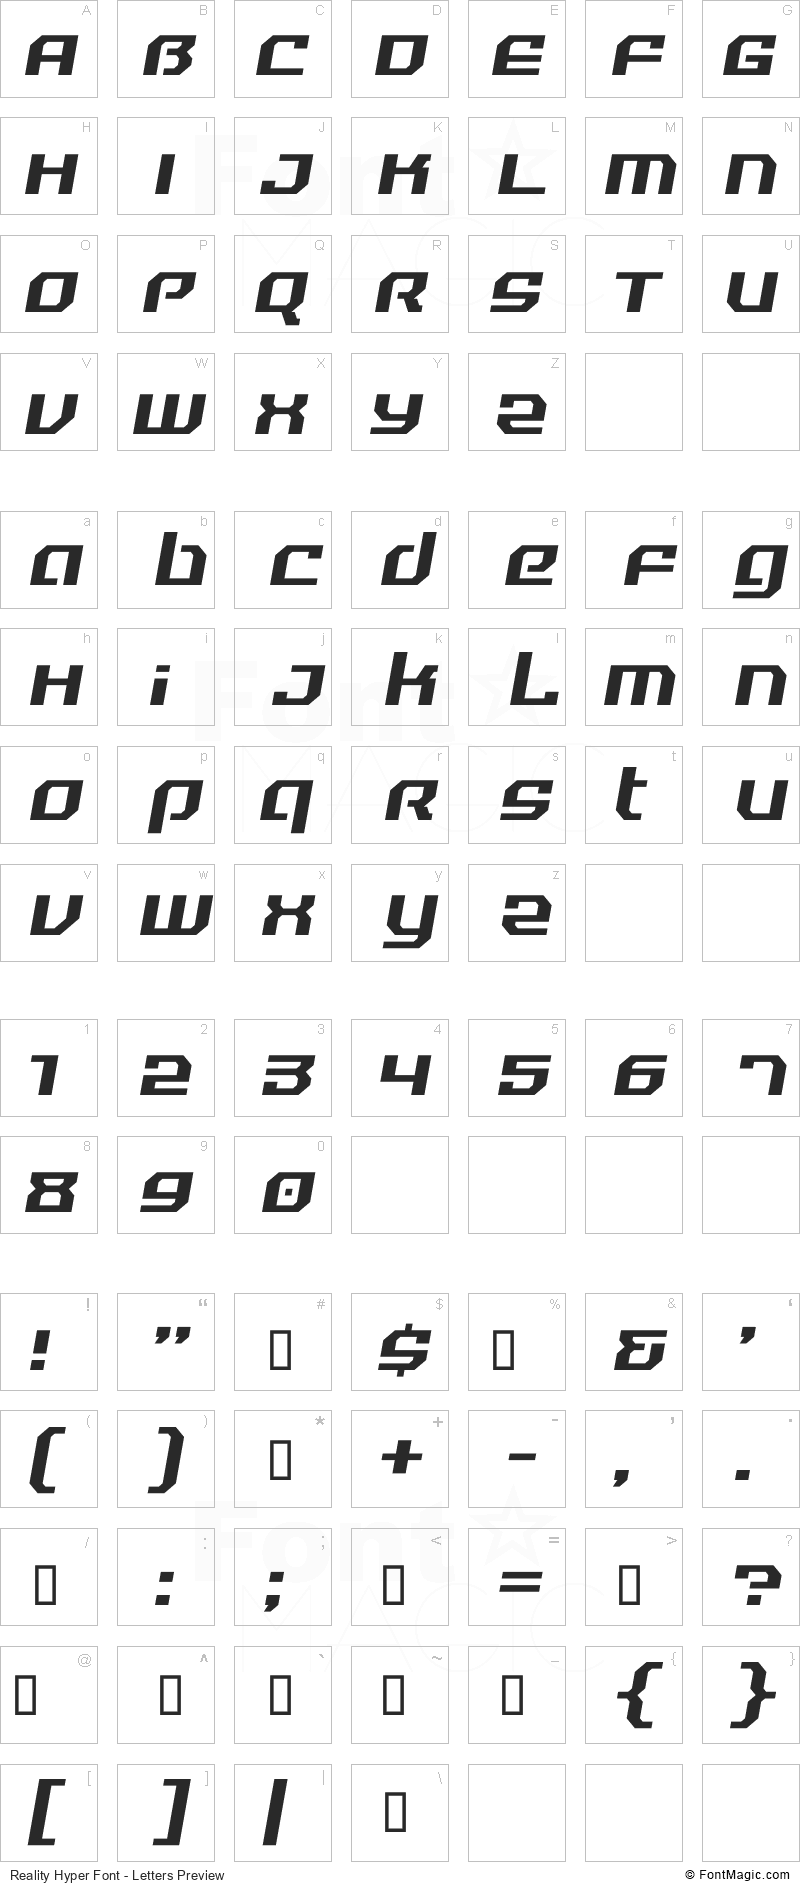 Reality Hyper Font - All Latters Preview Chart